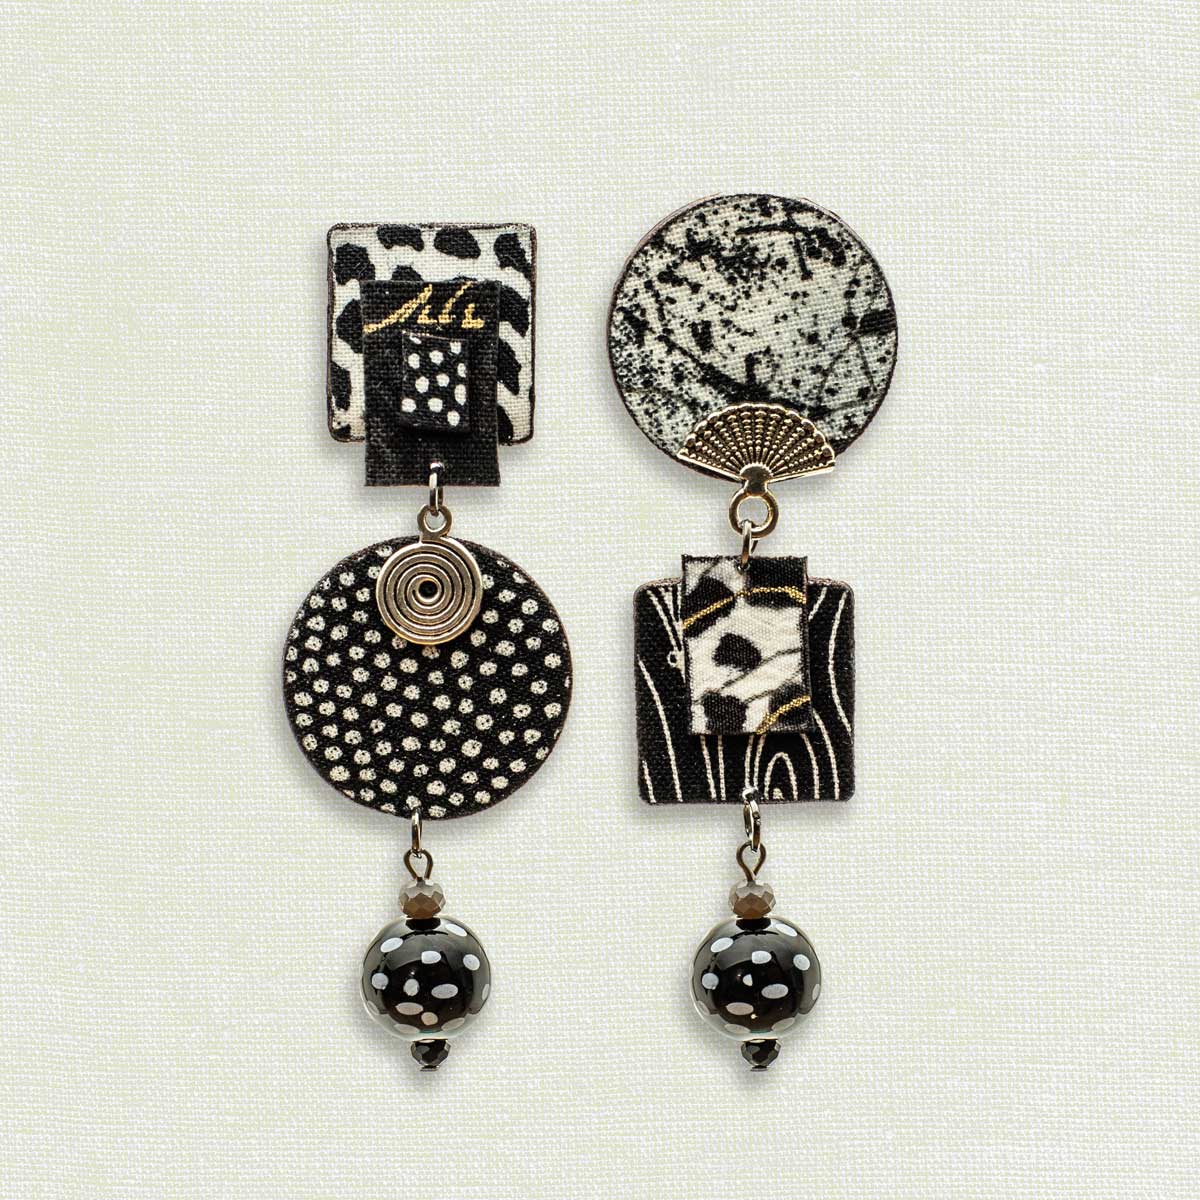 Asymmetric 3 tiered earrings, hand painted by artist Suzanne Bellows for SuzanneBellowsJewelry.com. This pair is part of the Graphic Collection and features bold black and white patterns.